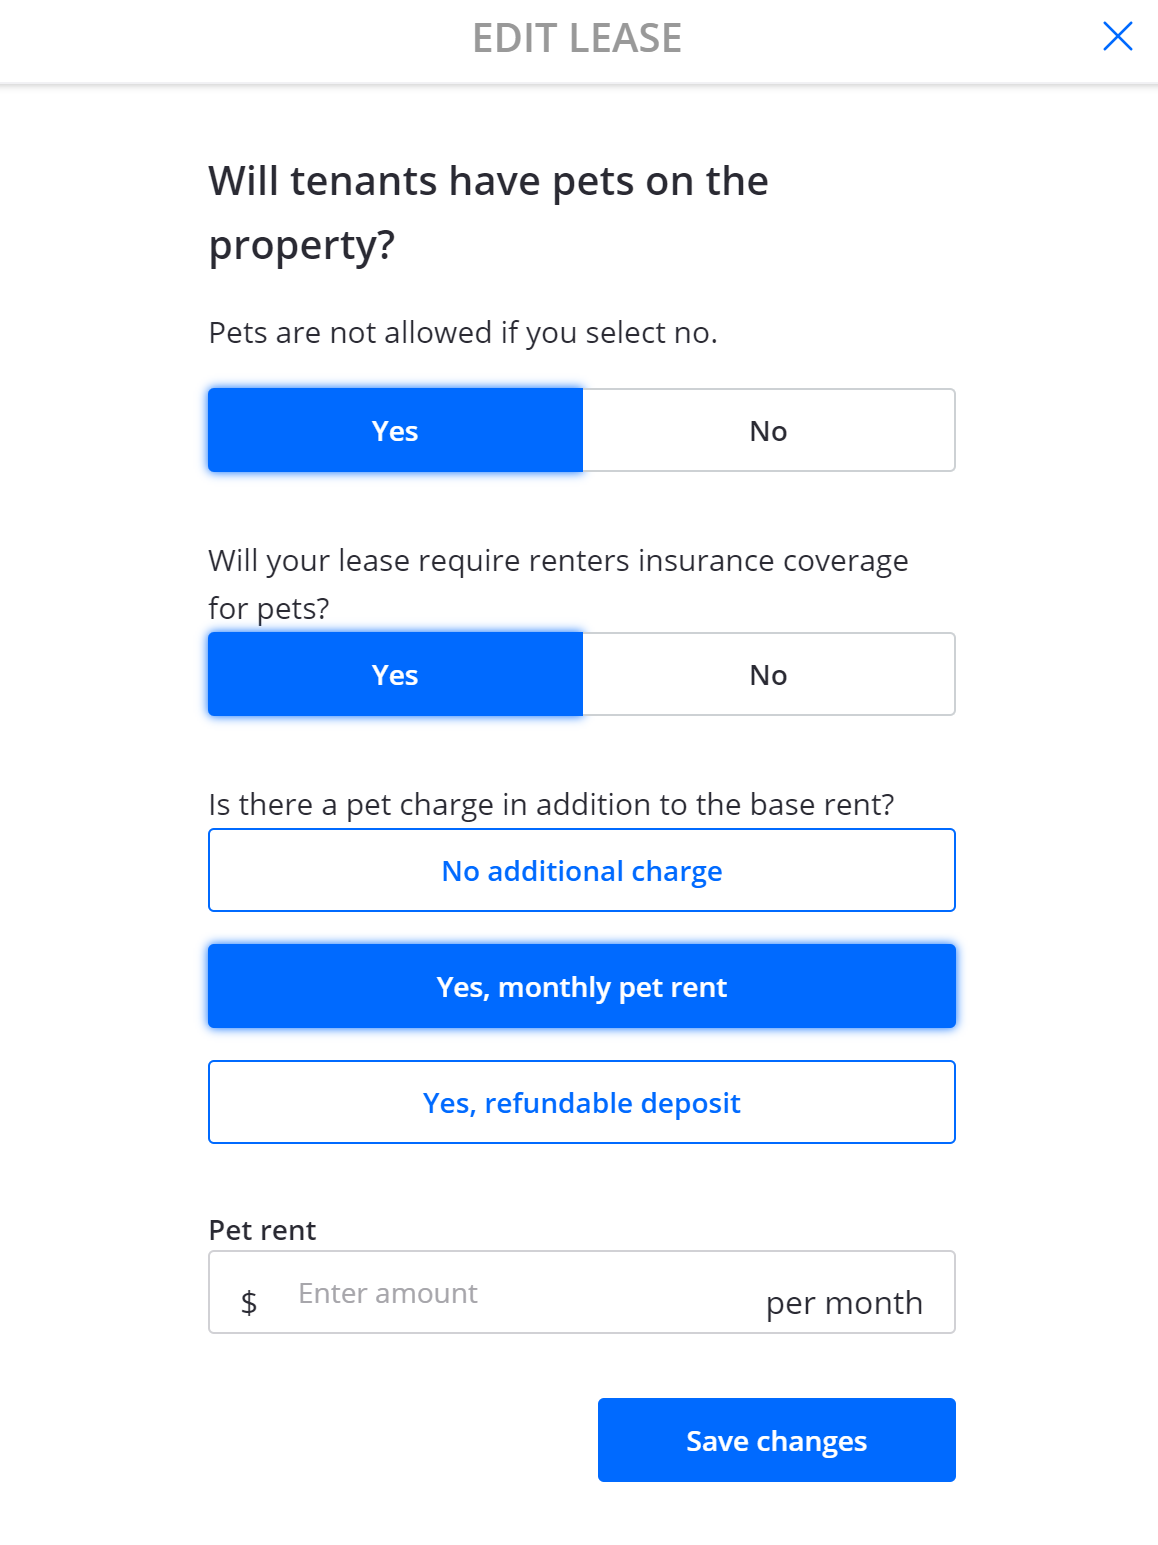 How to Make a Lease Agreement - Free Template  Zillow Rental Manager For zillow lease agreement template